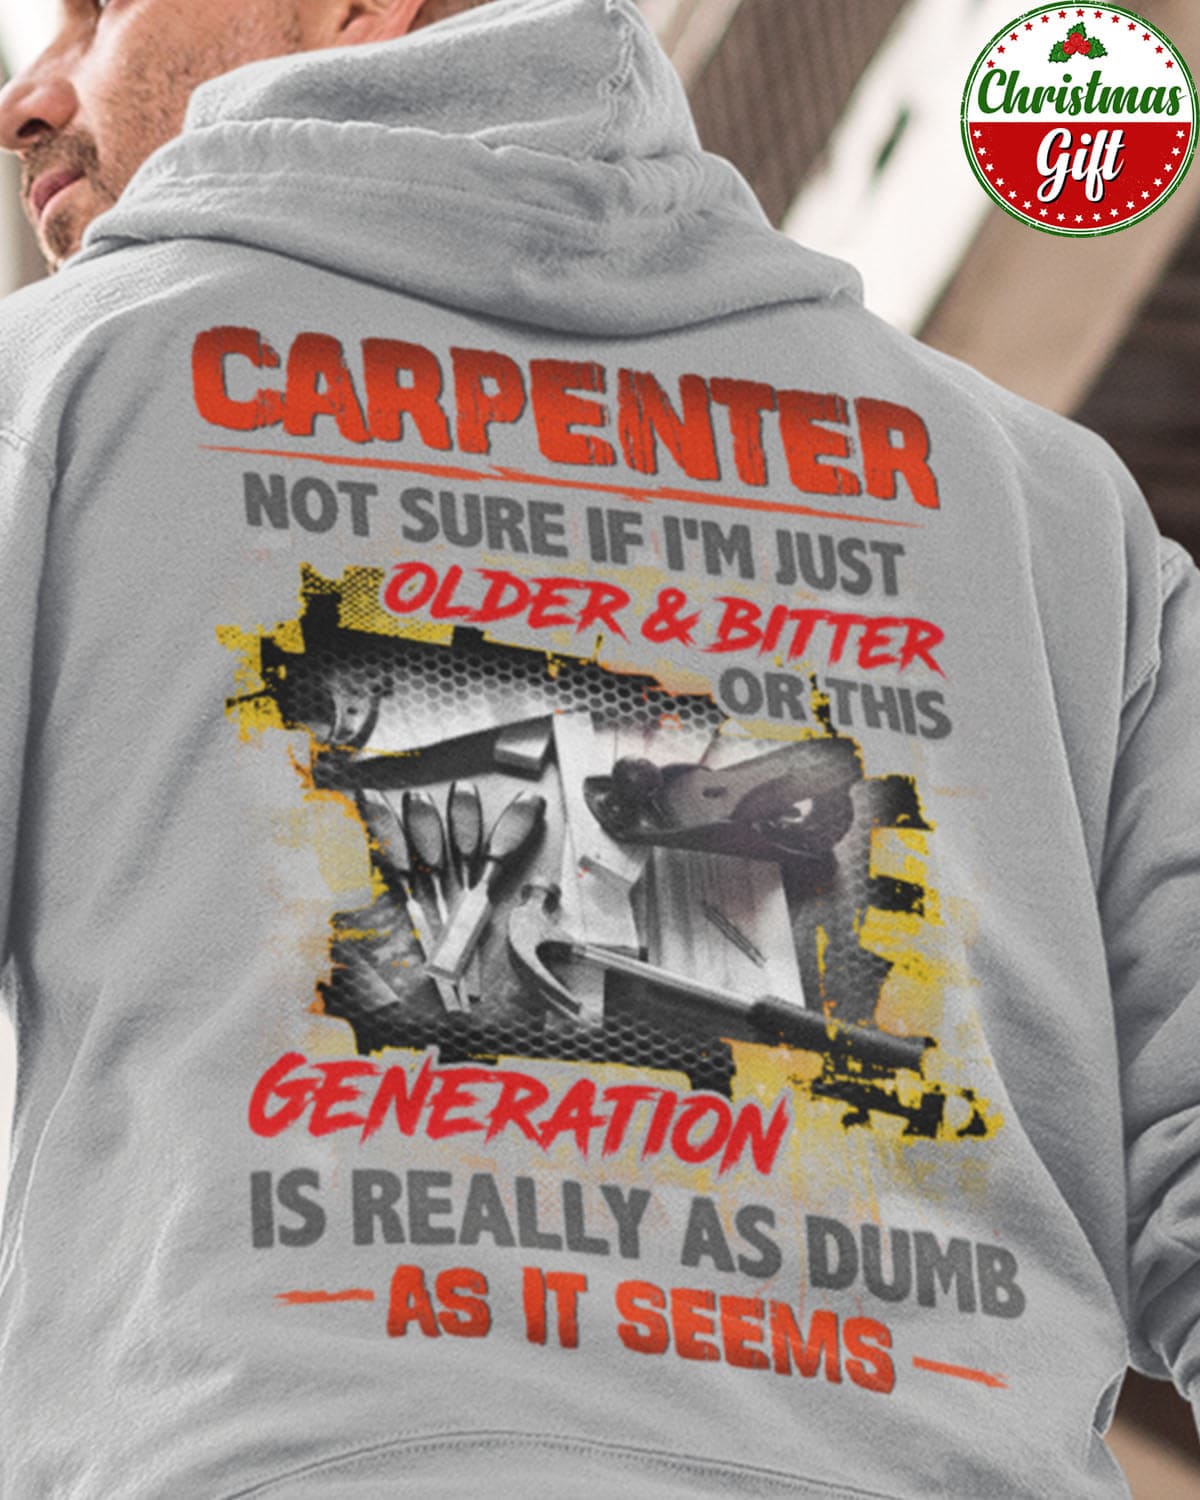 Carpenter not sure if I'm just older and bitter or this generation is really as dumb - Carpenter the job